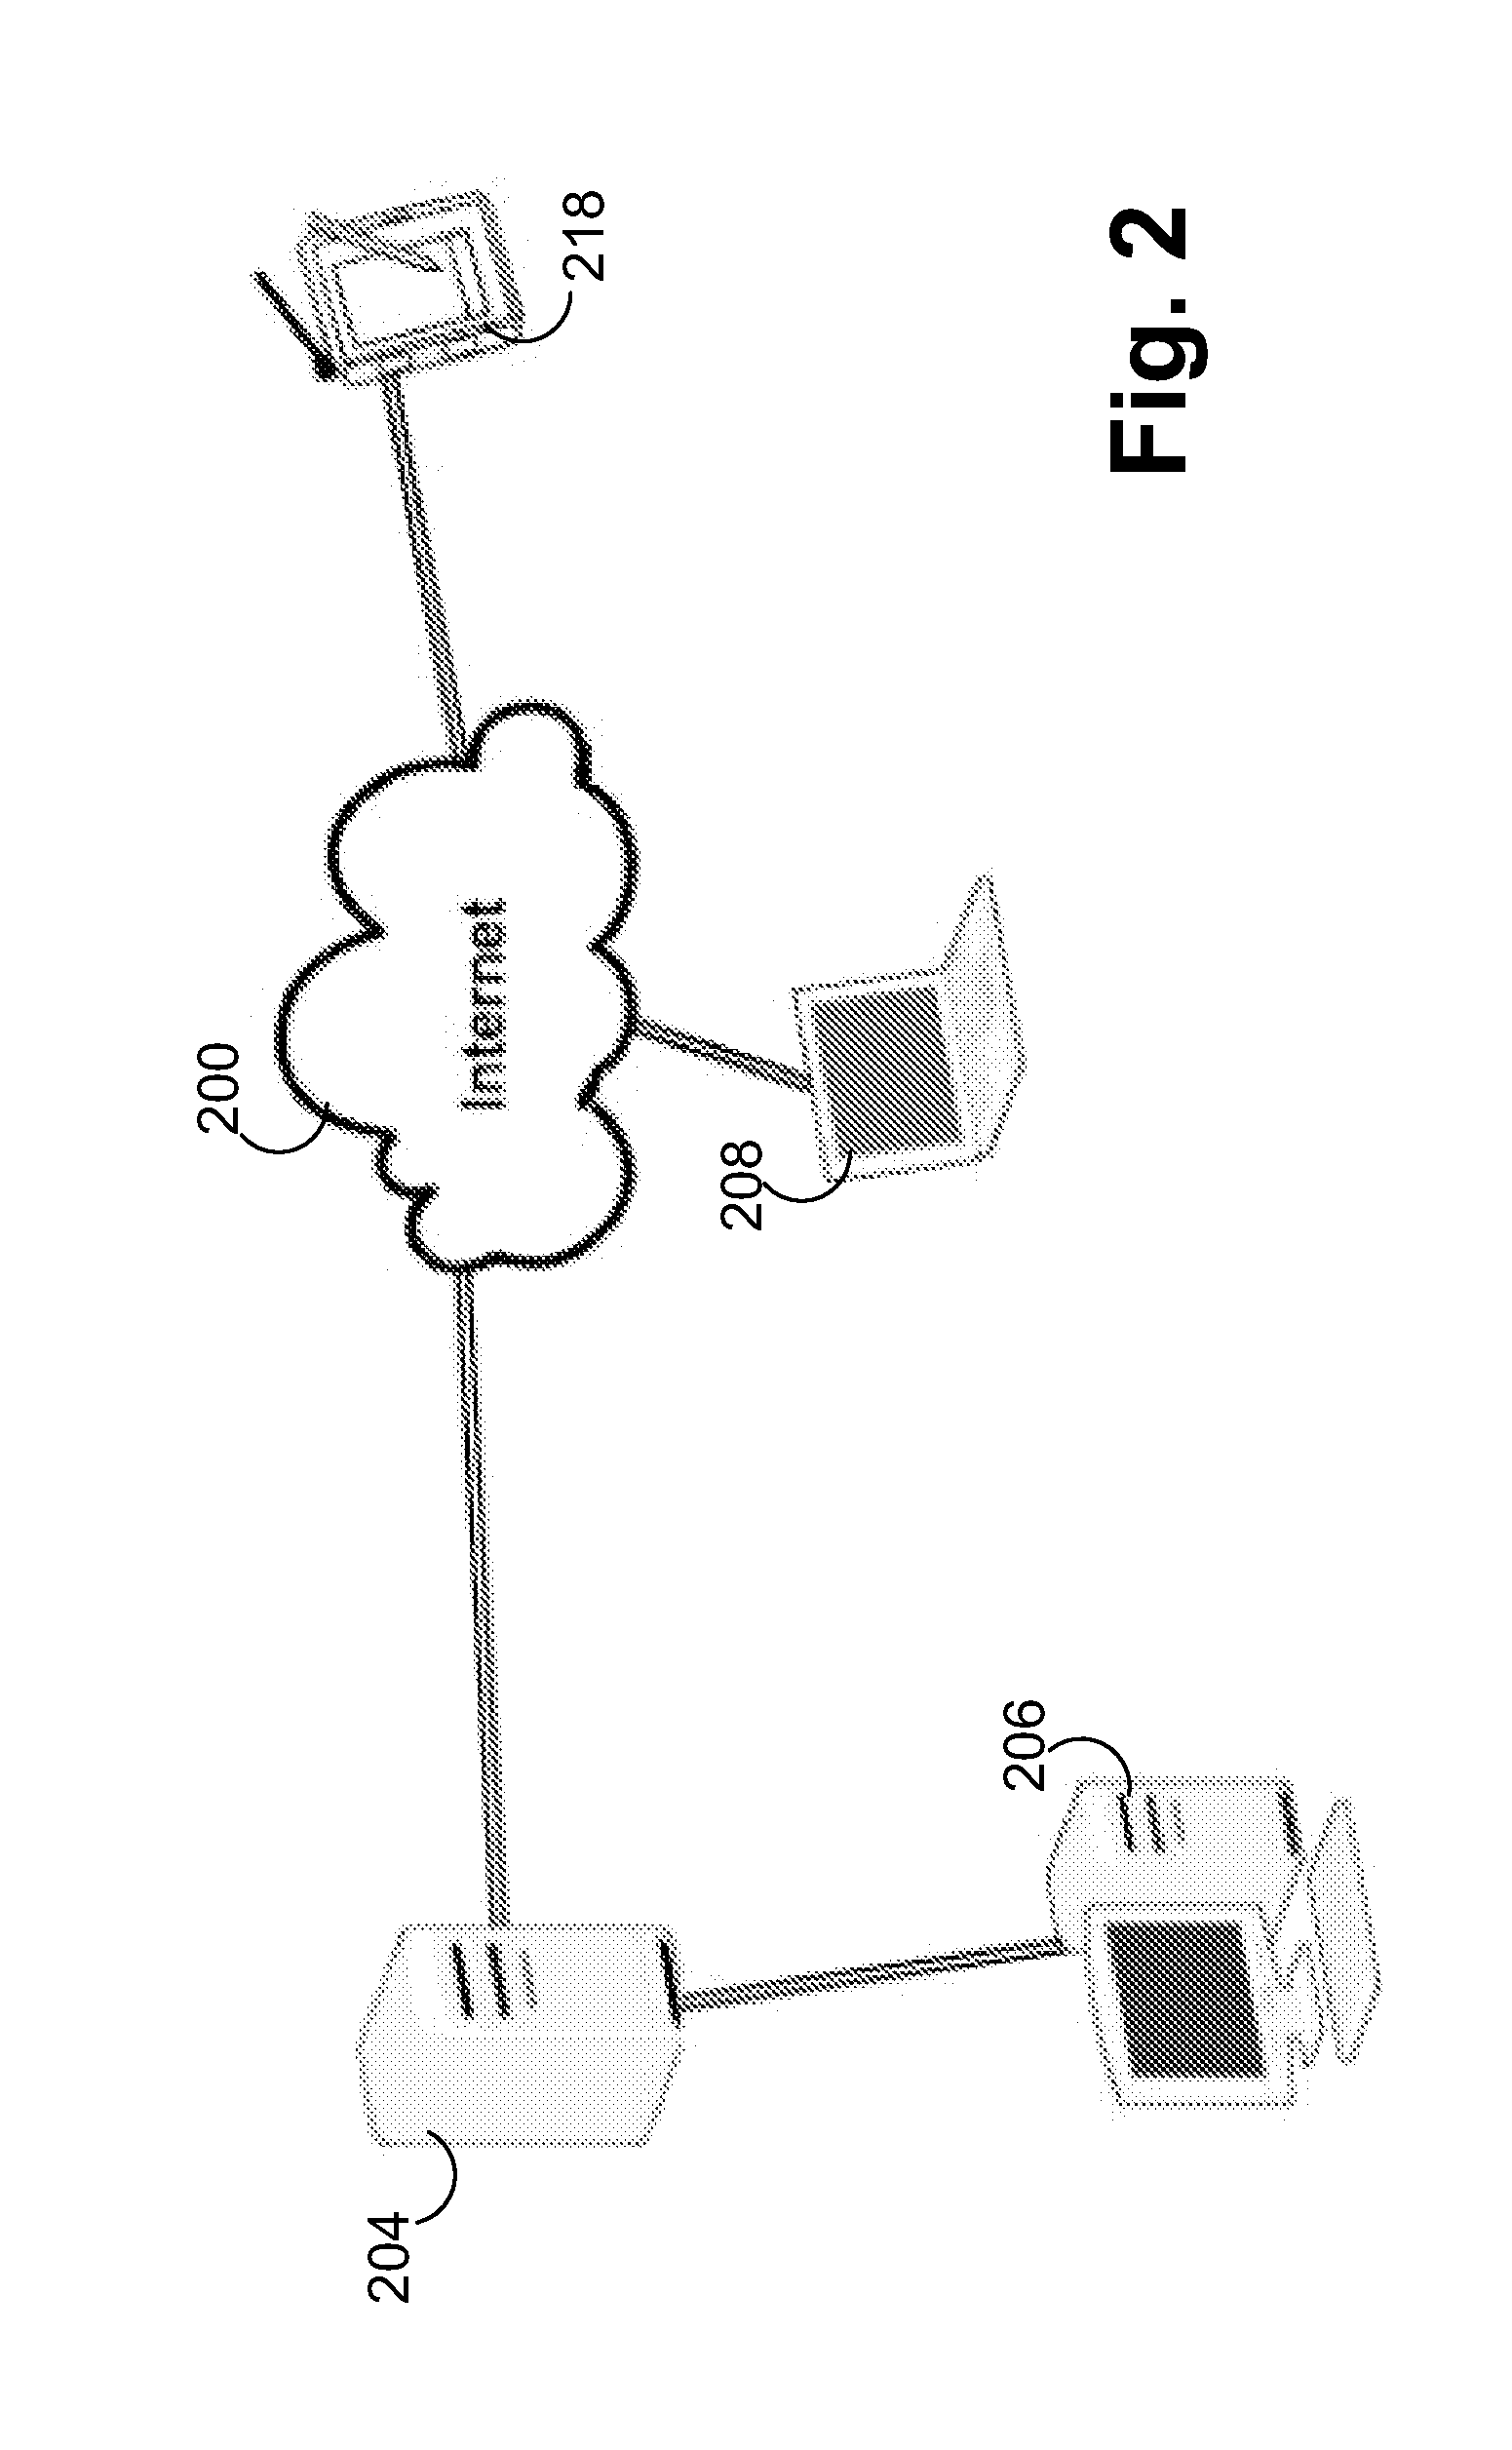 Method of presenting feedback to user of chances of password cracking, as the password is being created